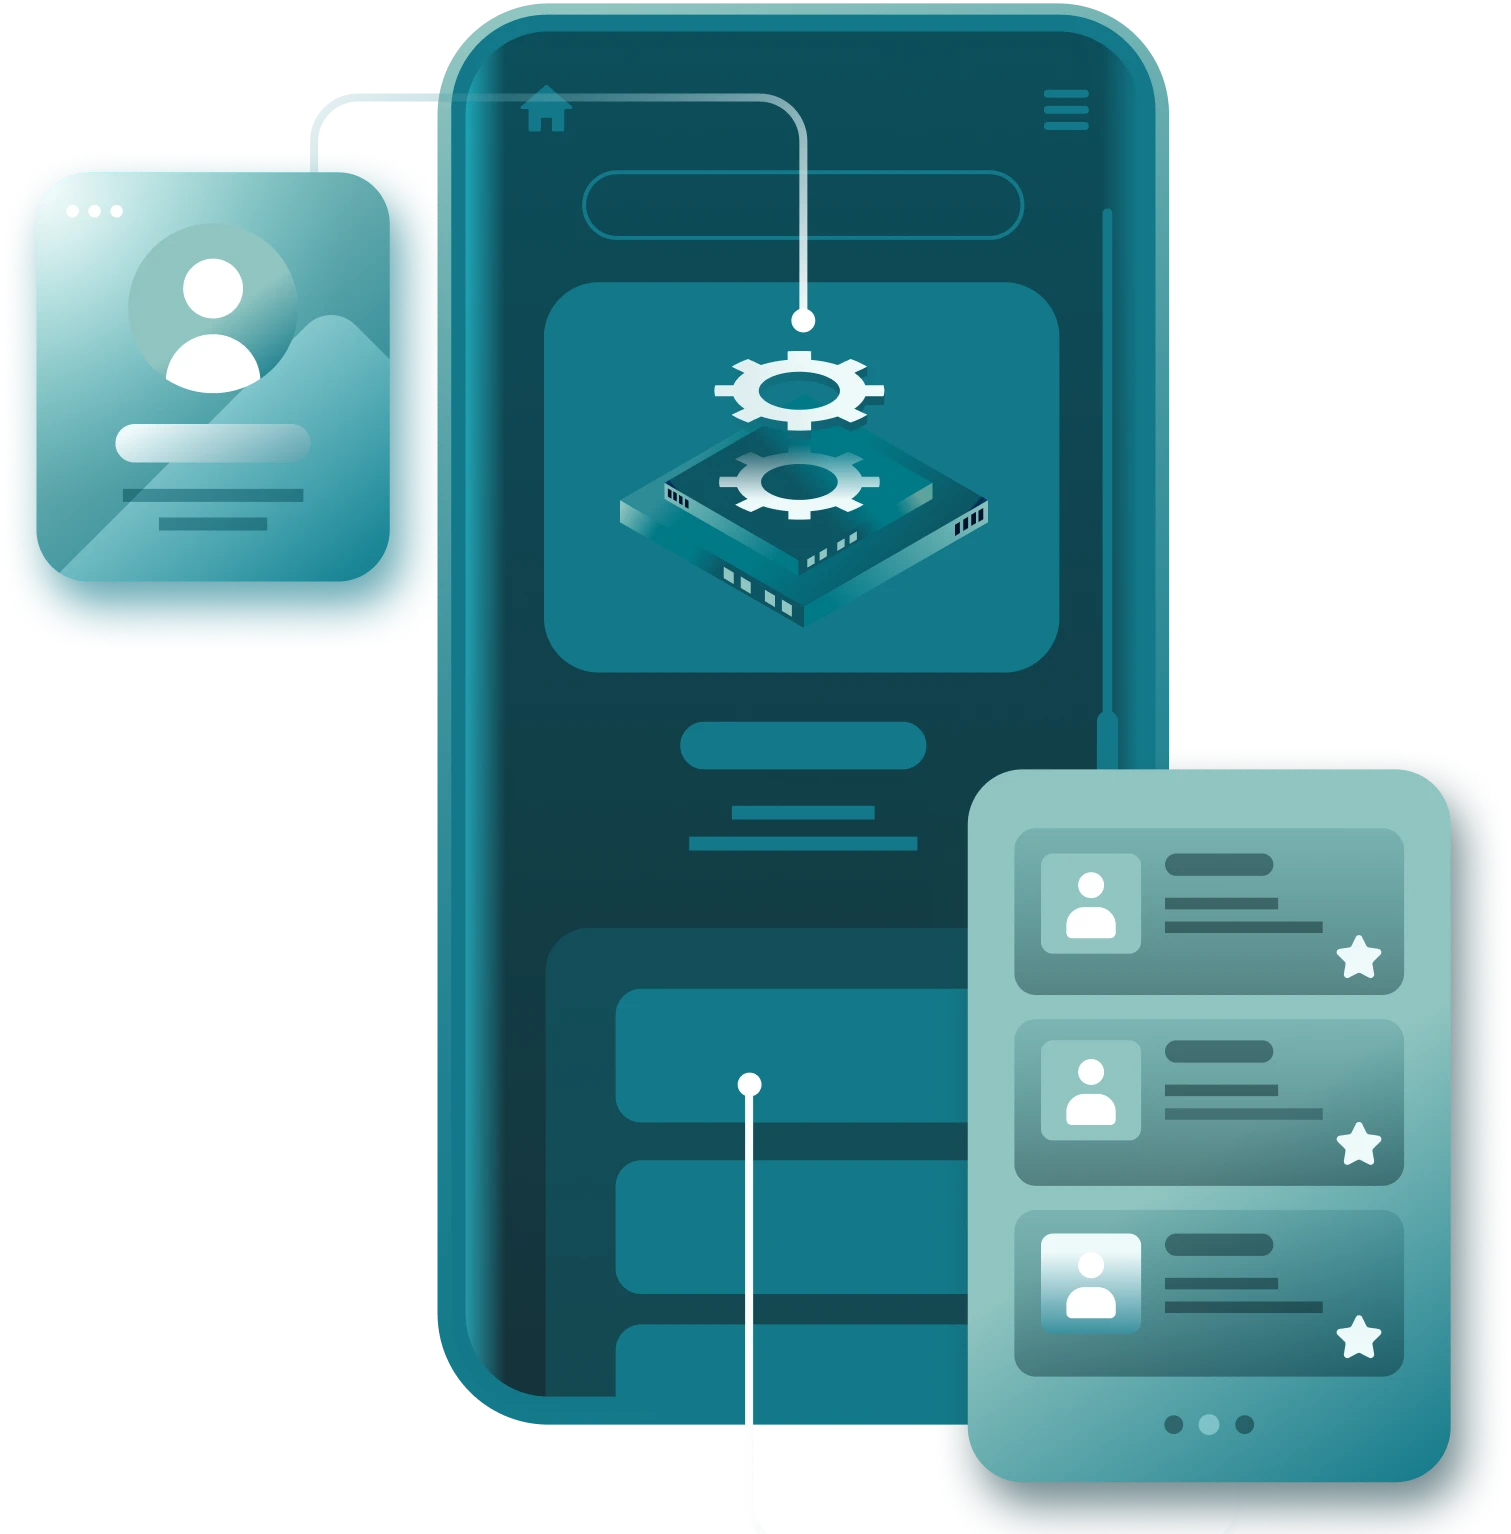 Your web application provides the basis for a mobile app.